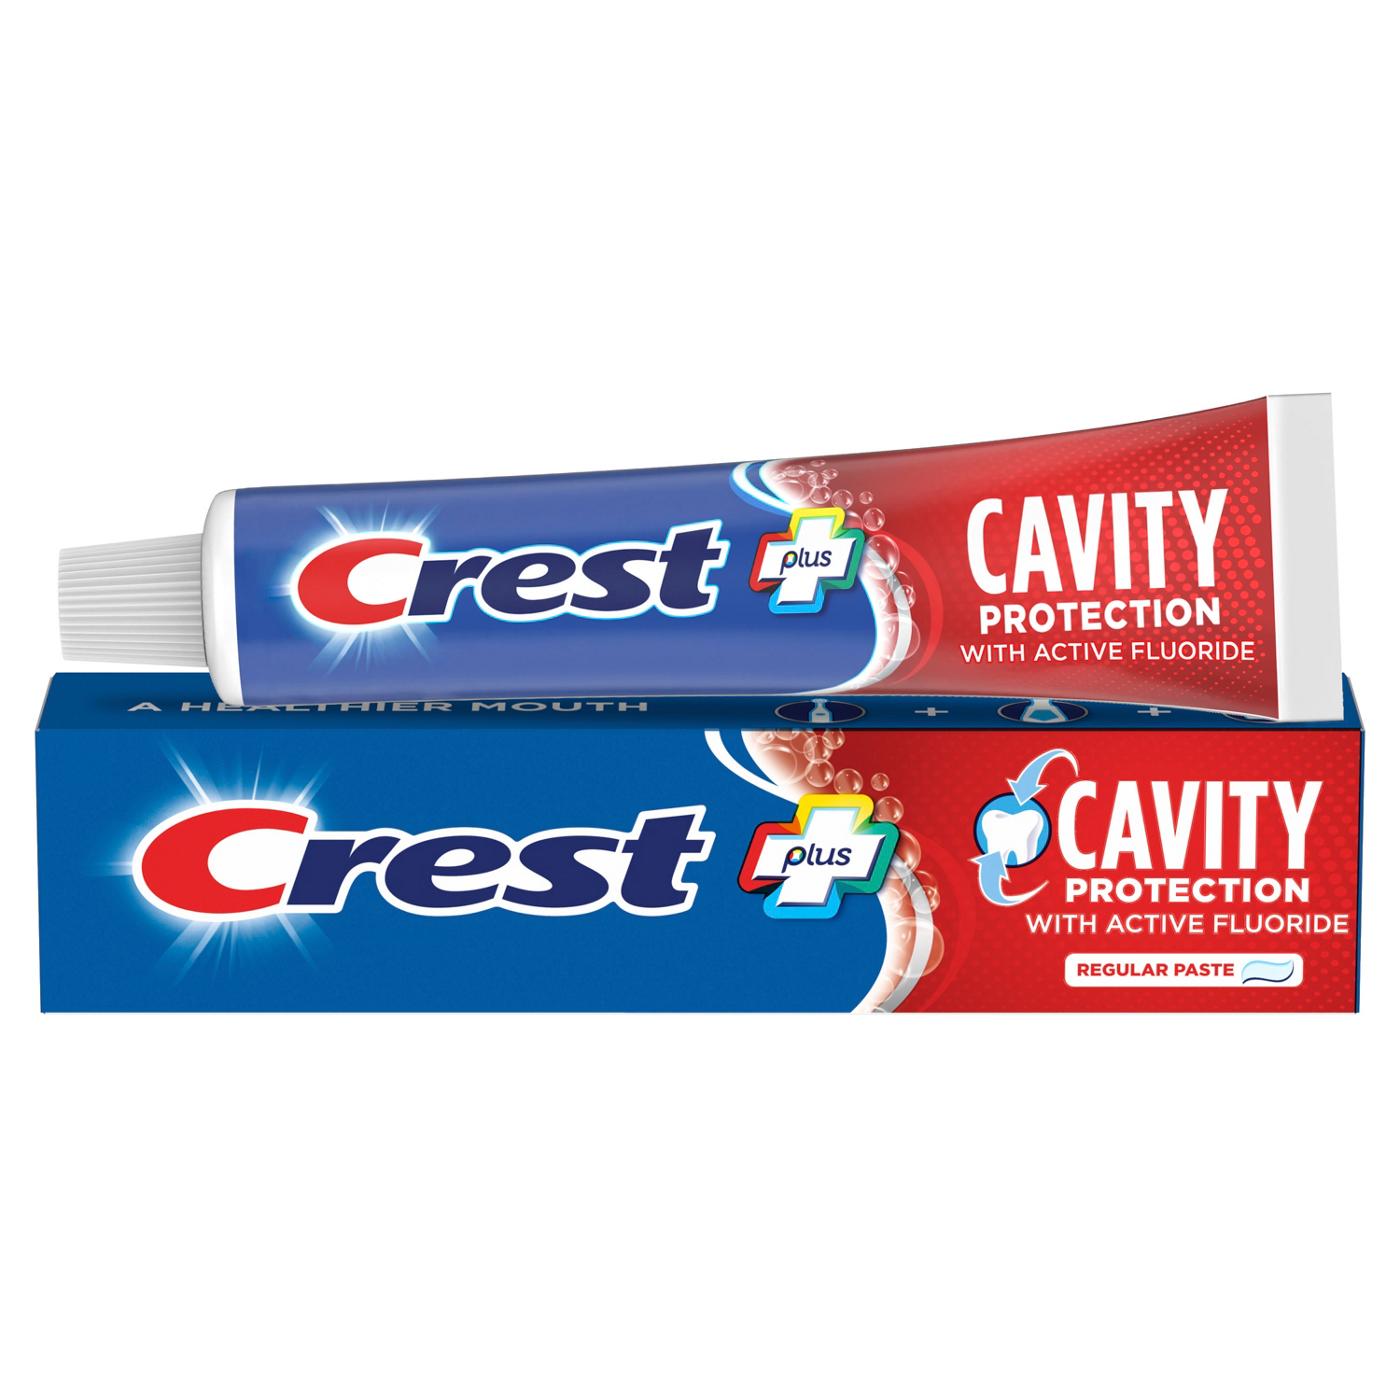 Crest Cavity Protection Regular Toothpaste; image 4 of 9